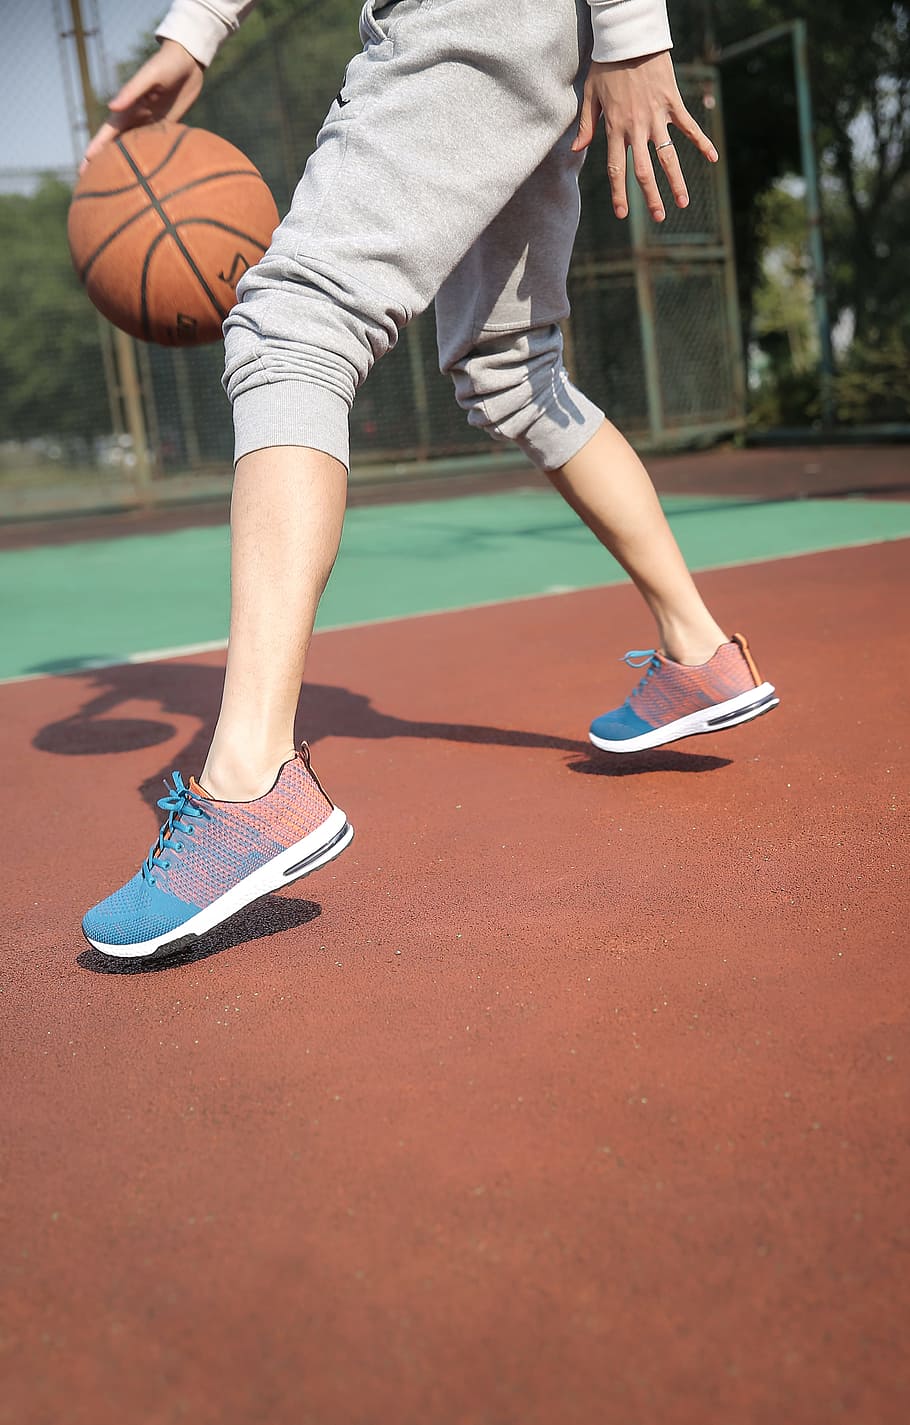 Person Dribbling Basketball, athlete, exercise, feet, footwear